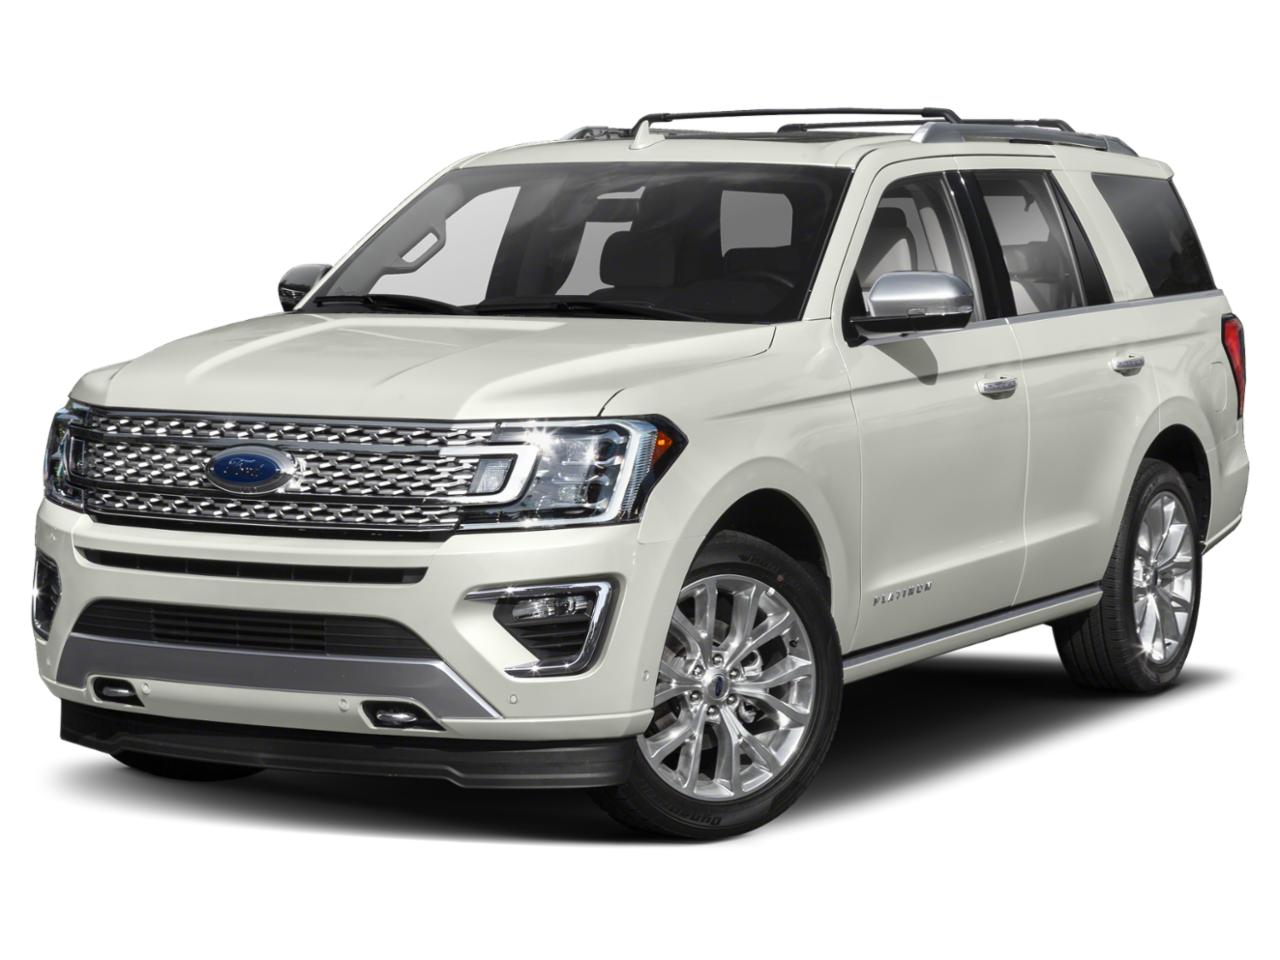 2019 Ford Expedition Vehicle Photo in South Hill, VA 23970